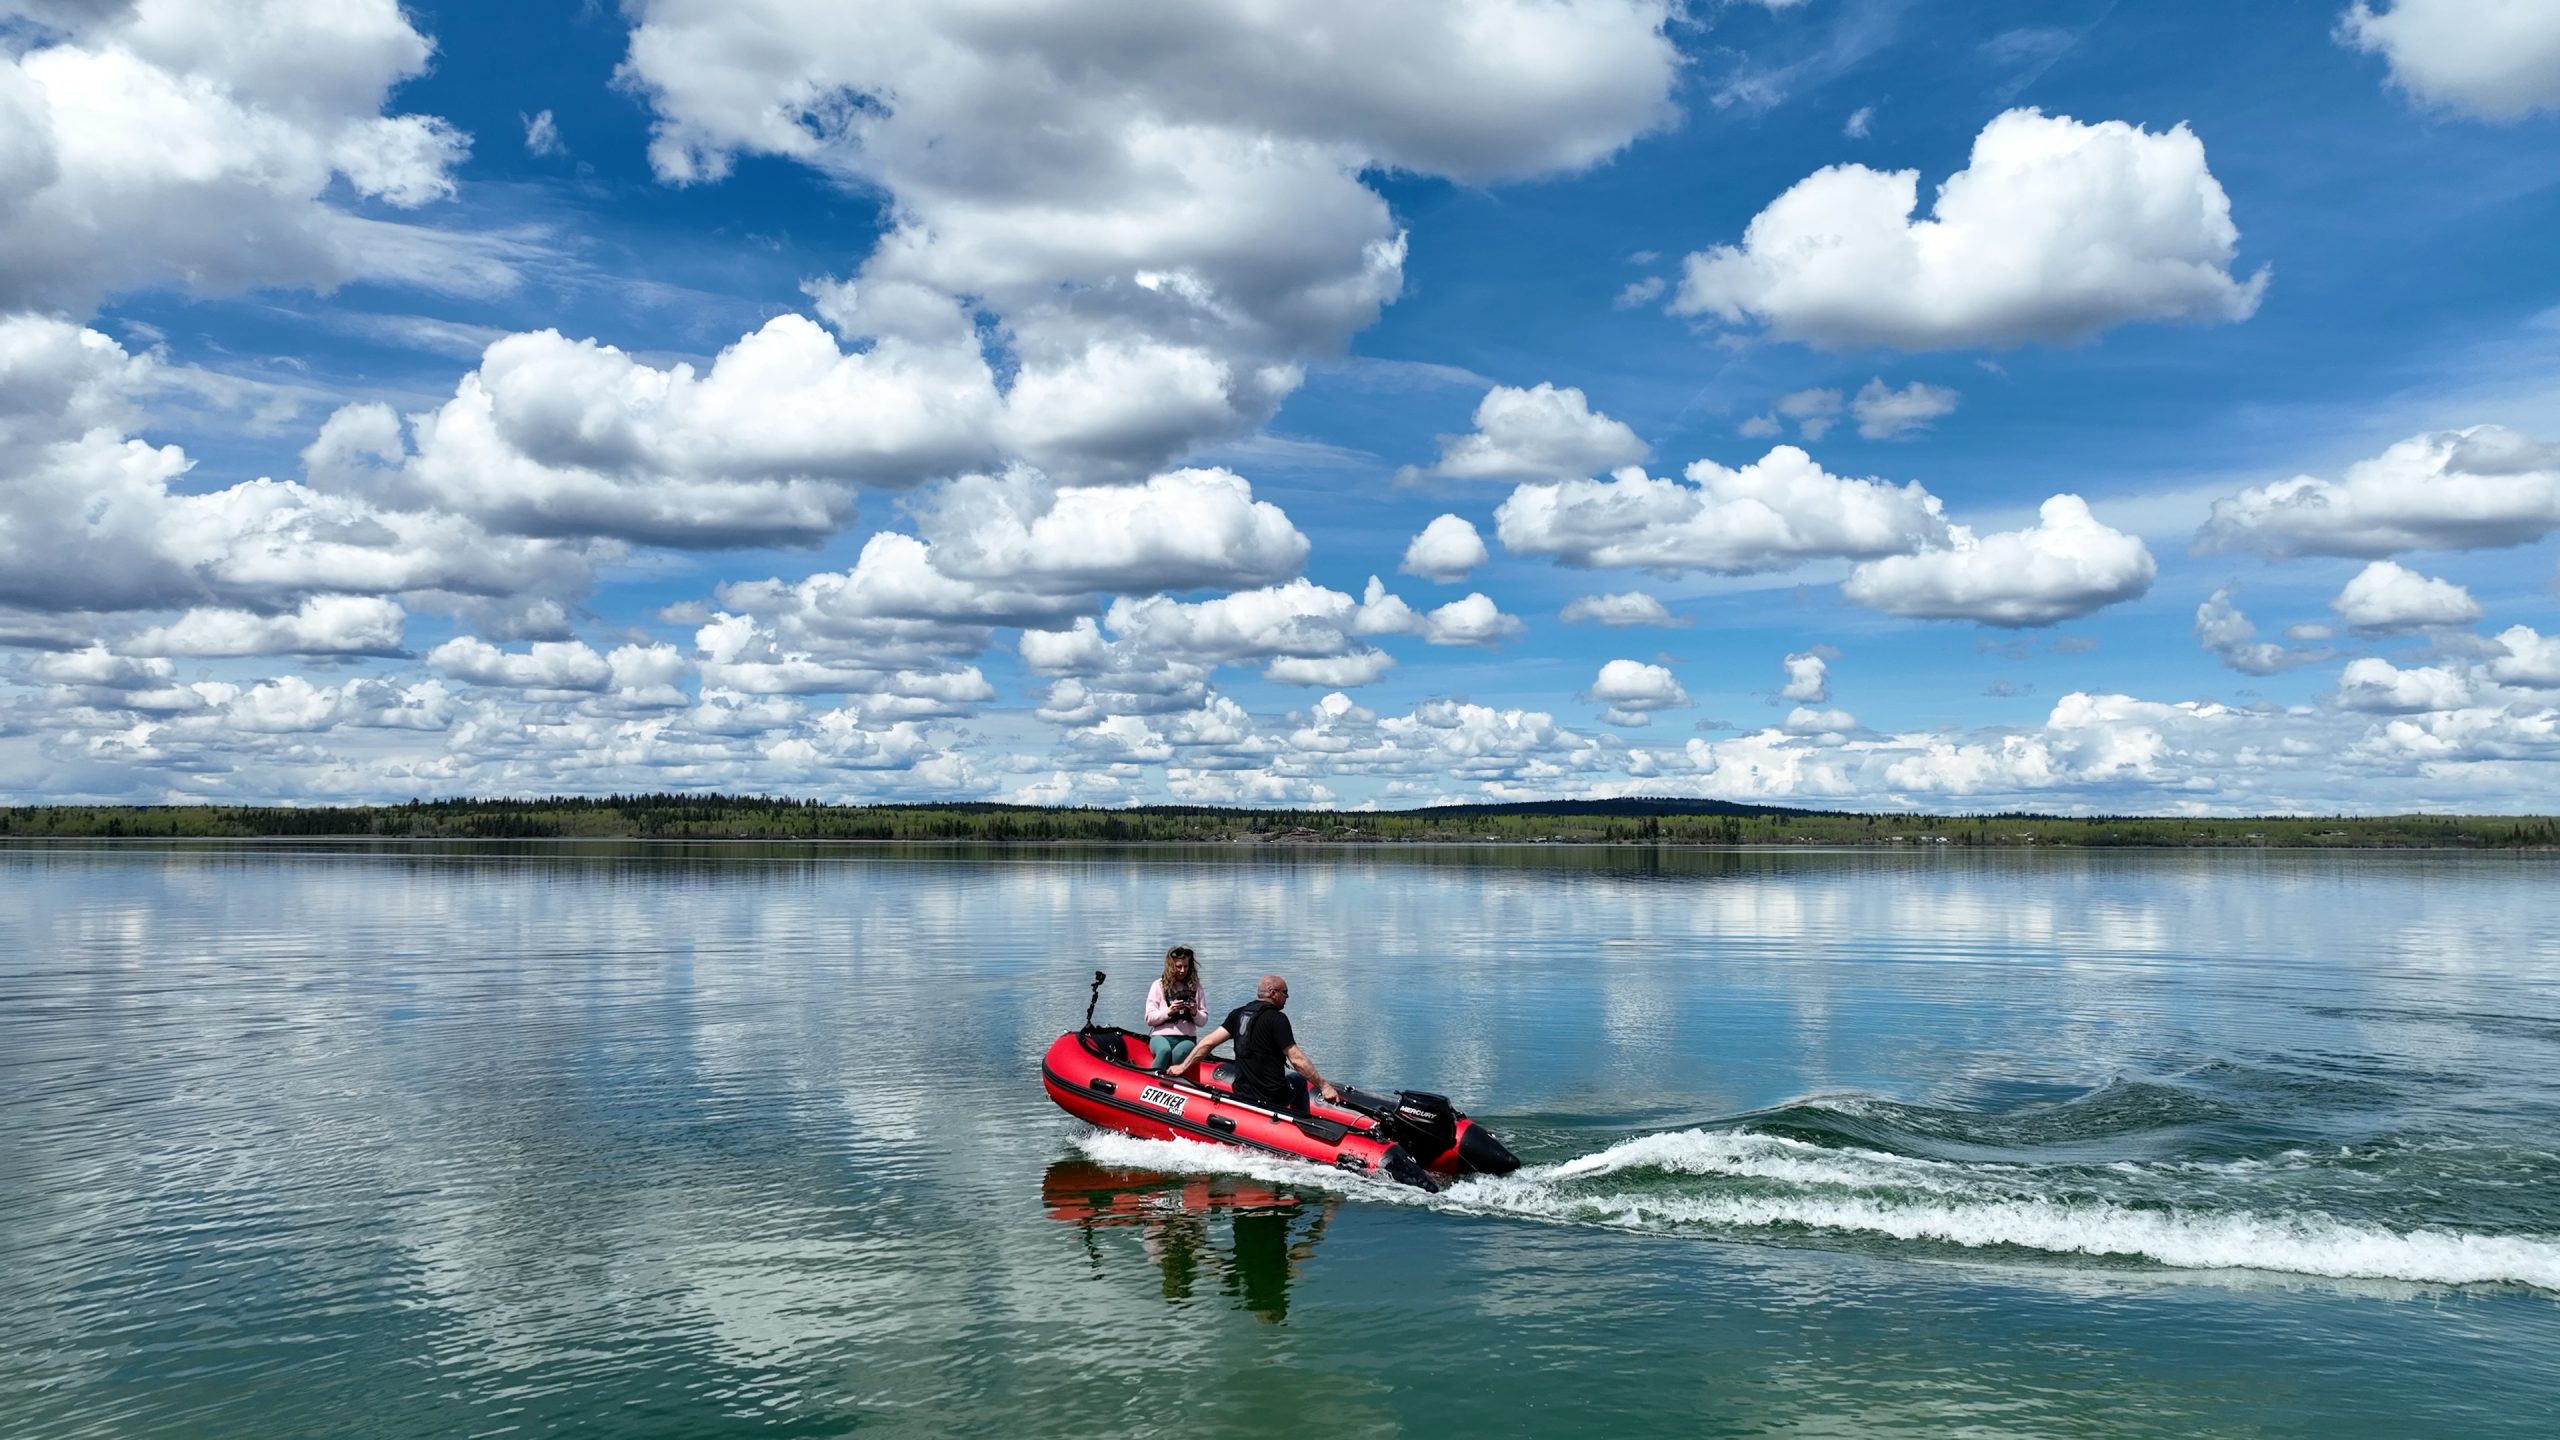 Buying an inflatable boat